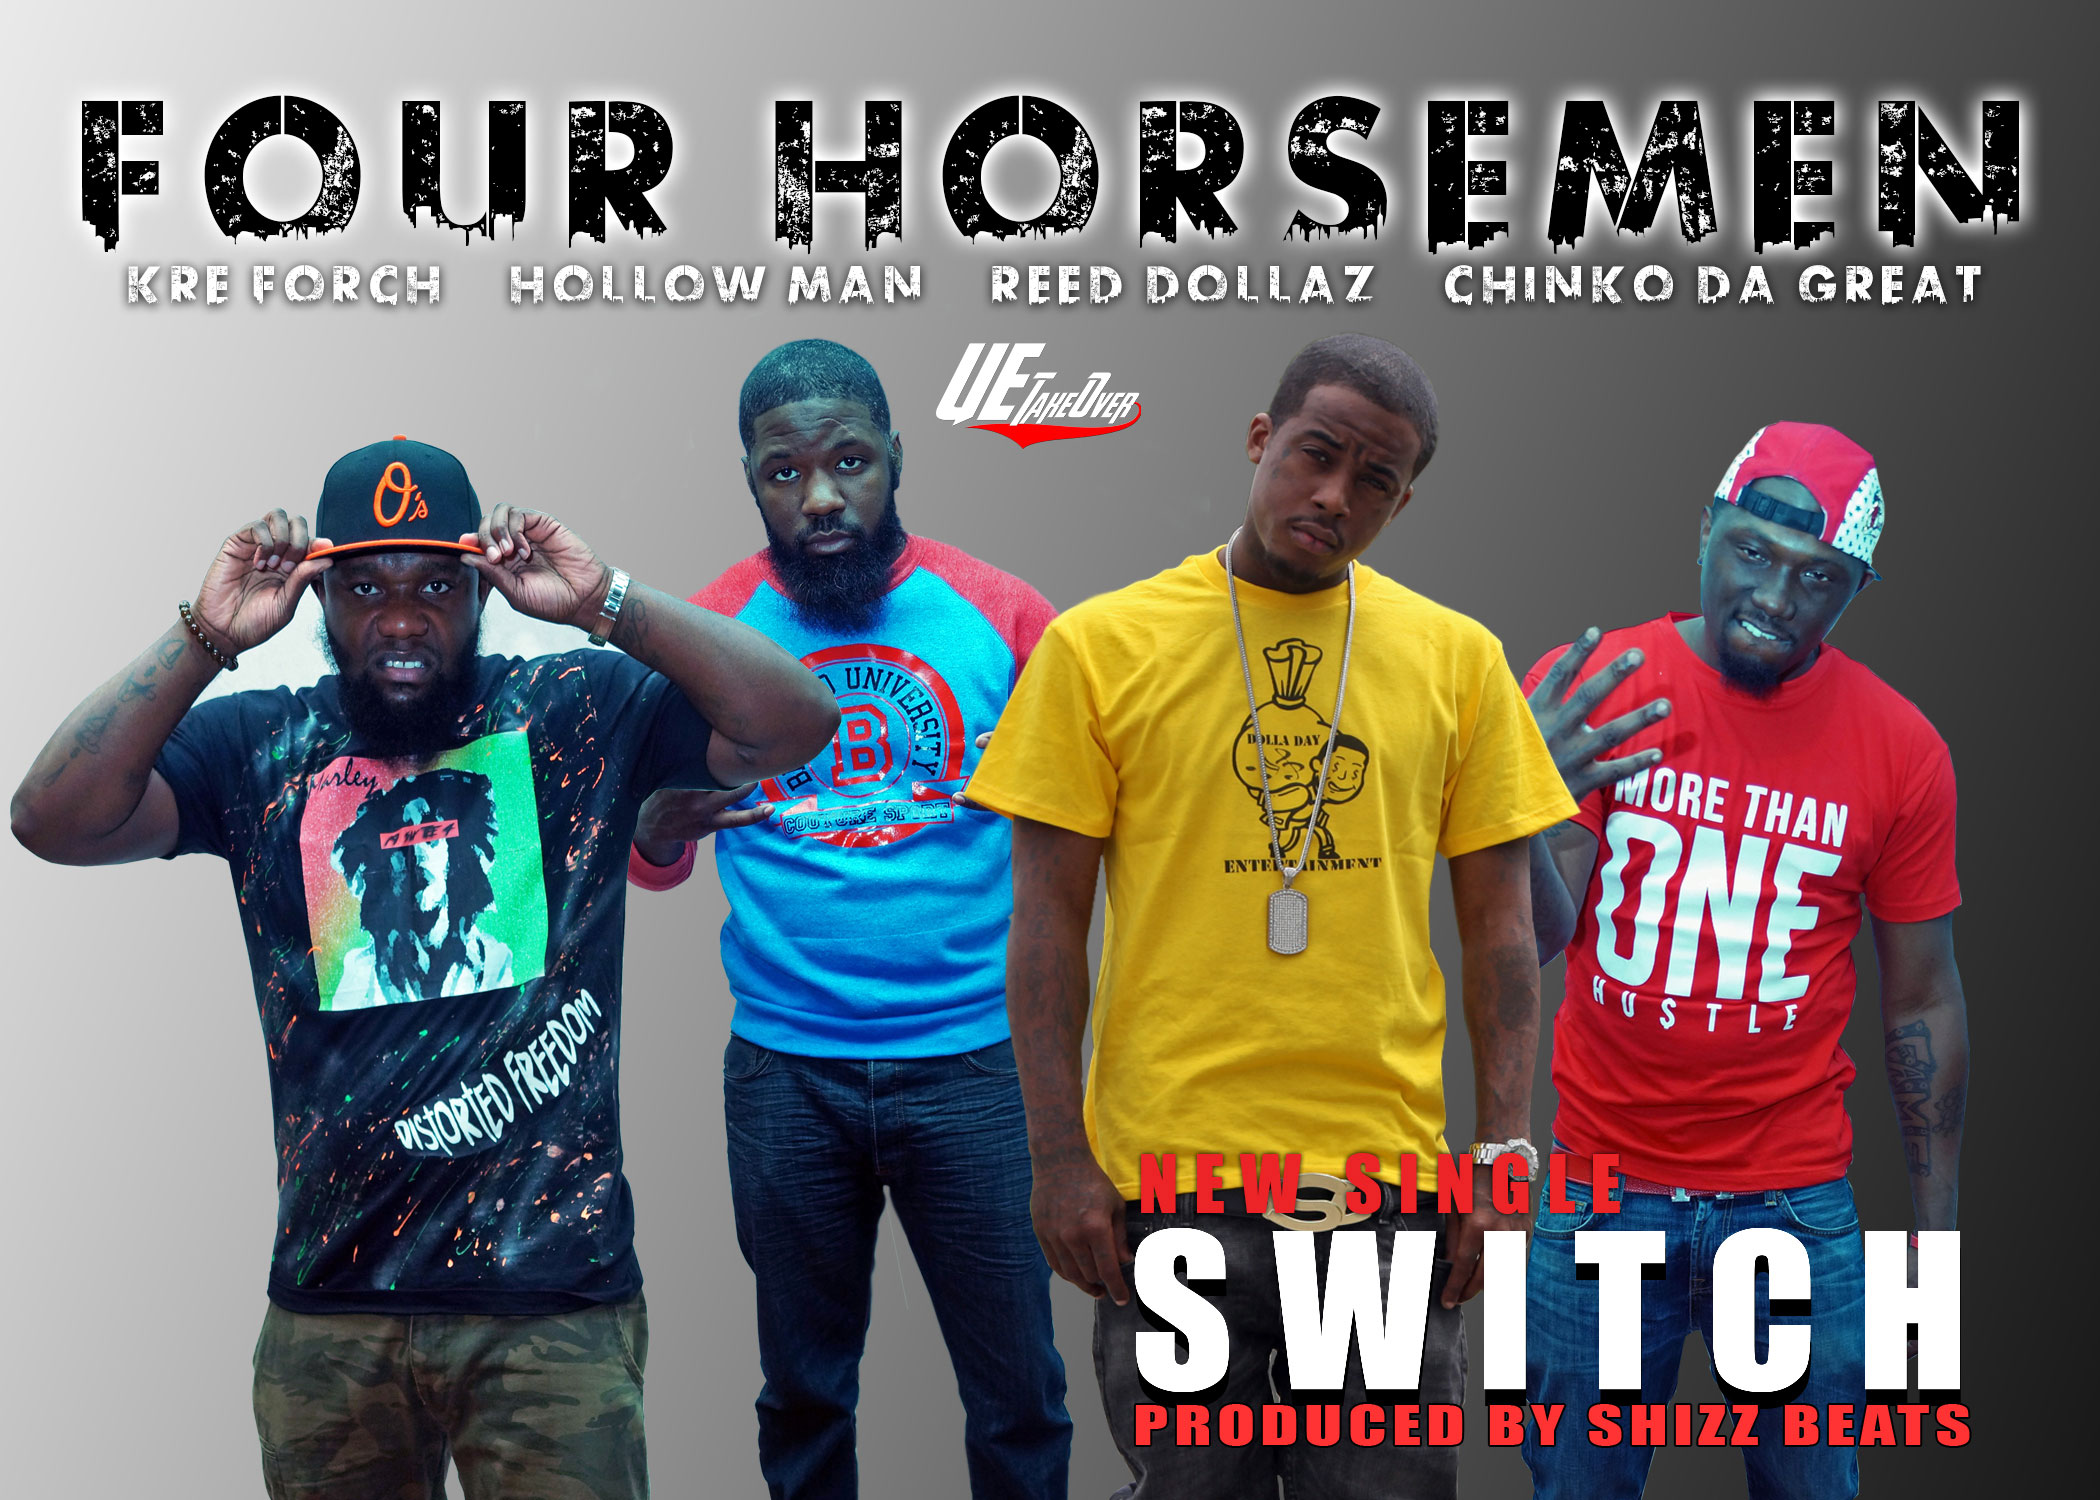 the-four-horsemen-switch-hollow-man-kre-forch-reed-dollaz-chink-da-great-HHS1987-2013 The Four Horsemen - Switch (Hollow Man, Kre Forch, Reed Dollaz, Chink da Great)  